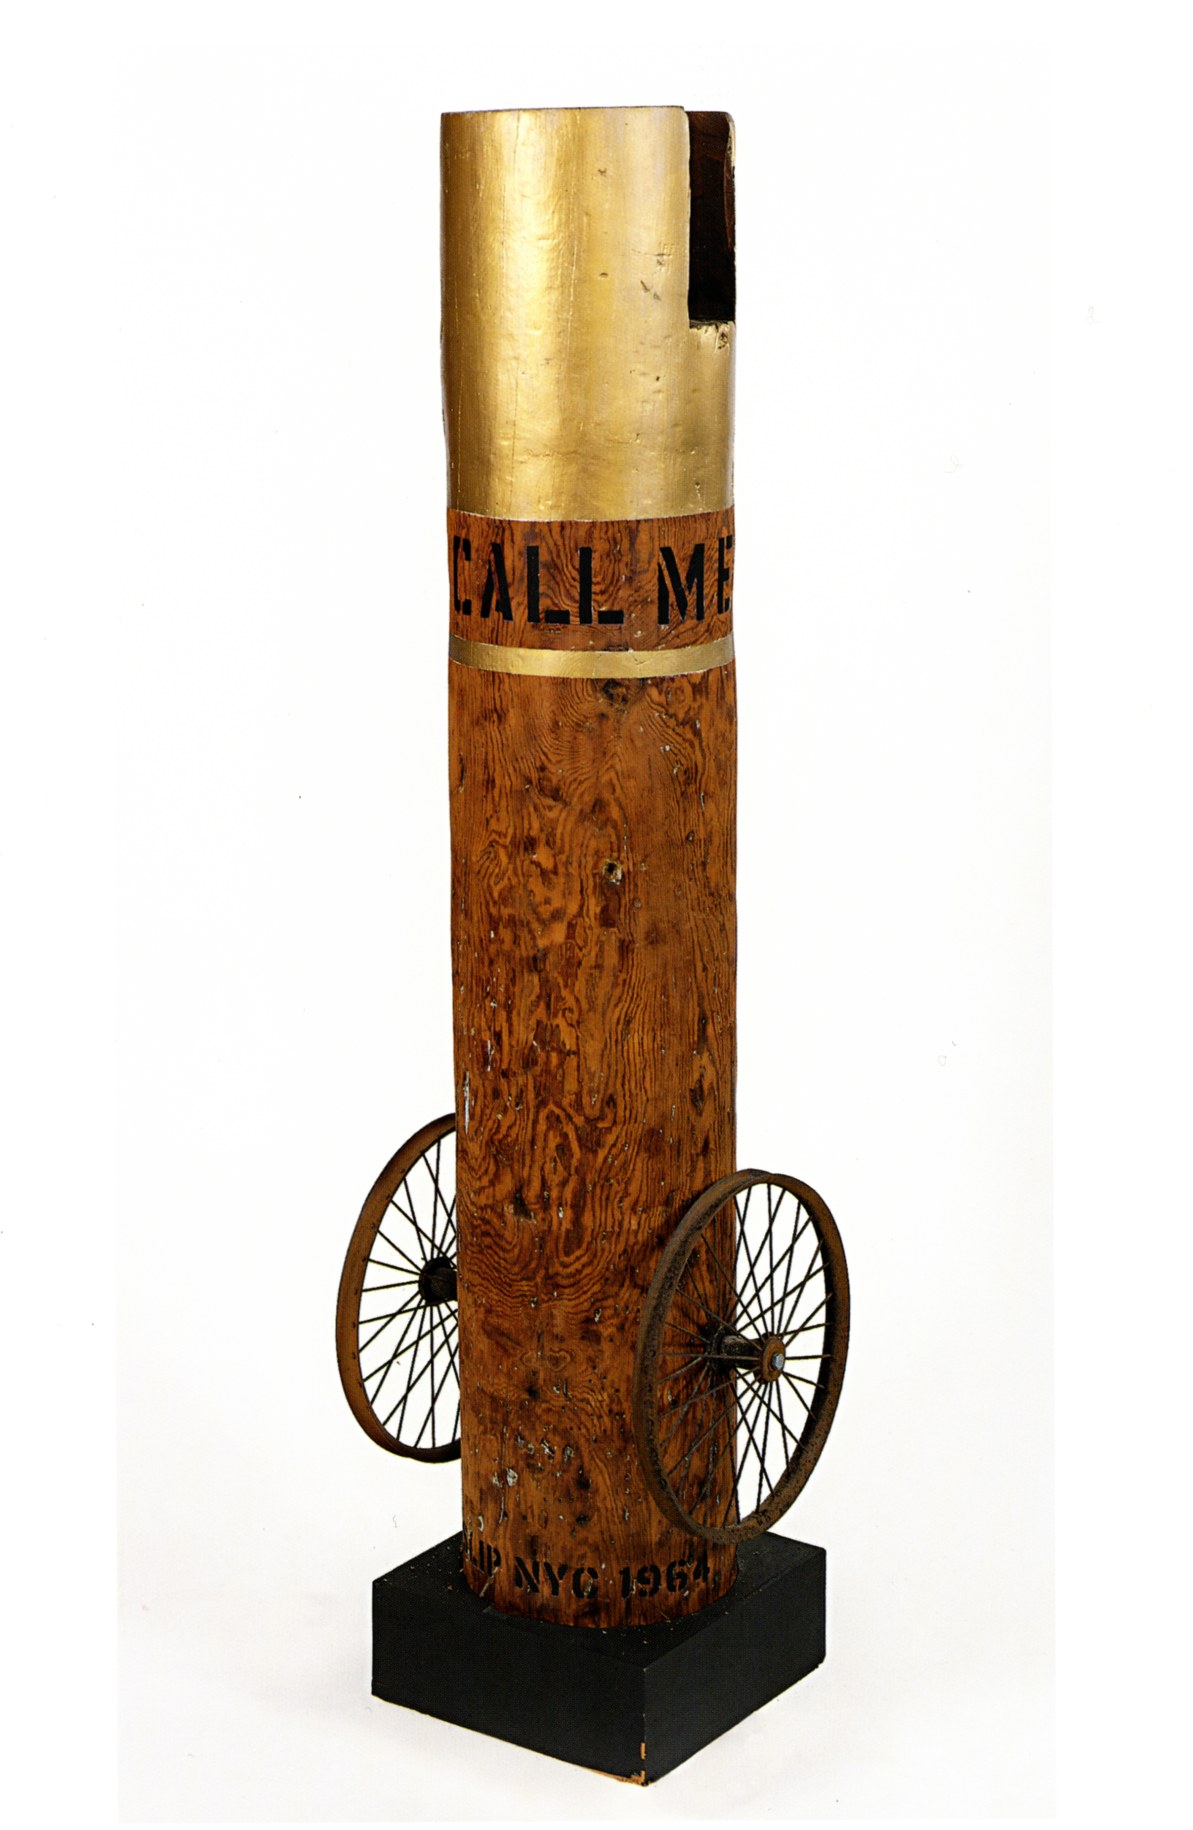 A 63 5/8 by 17 by 14 inch column with an iron wheel on the bottom left and right of the sculpture, and standing on a wooden base. The top of the column is gold, below, in black letters wrapping around the column, is its title, &quot;Call Me Indiana.&quot; Below the title, wrapping around the column, is a gold stripe.